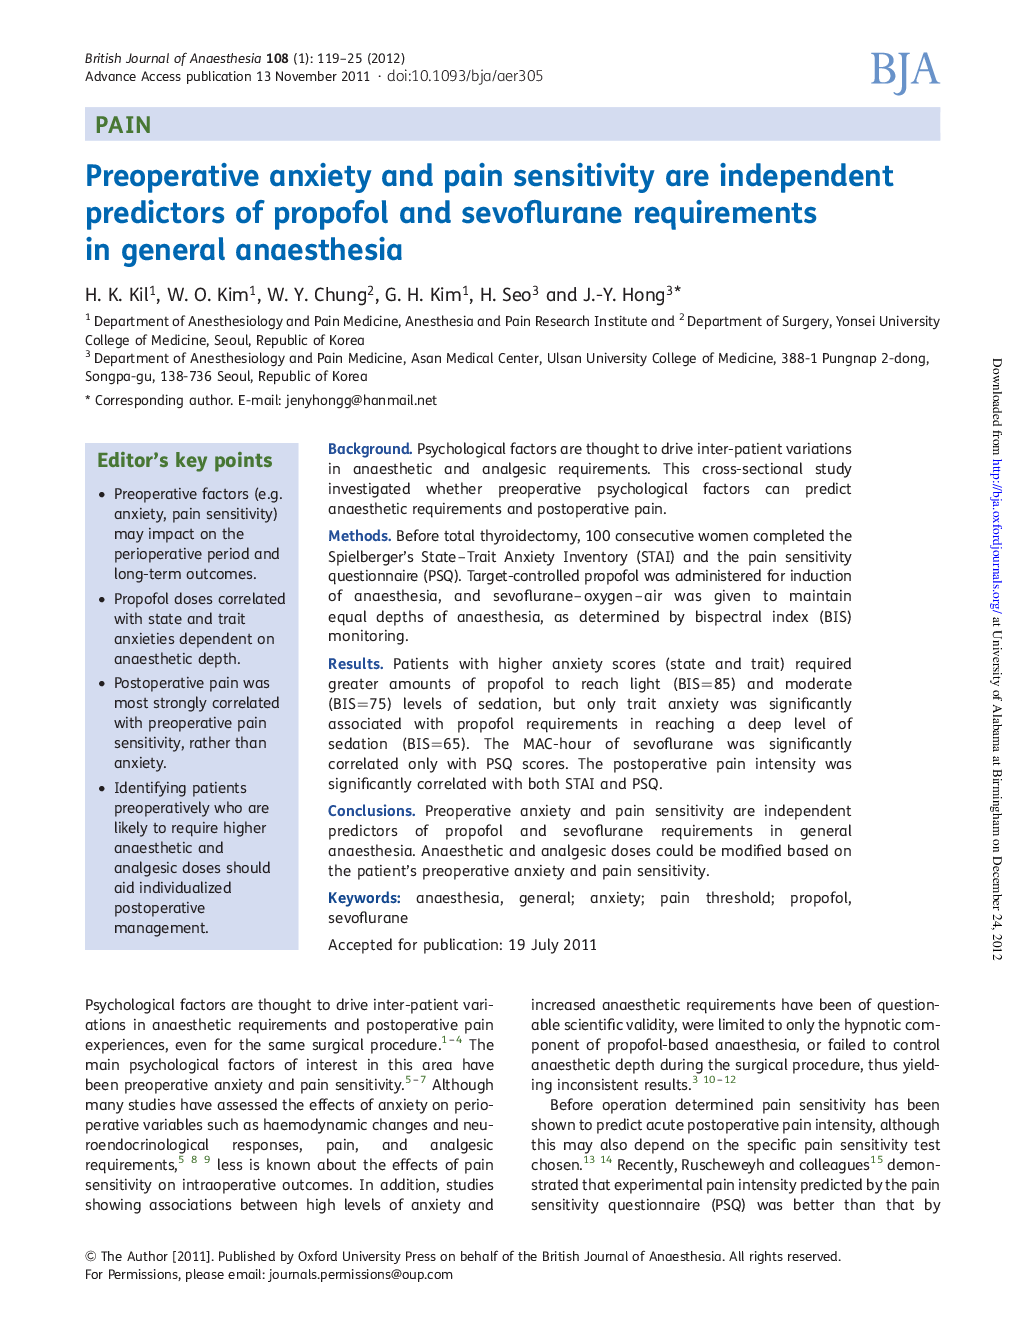 Preoperative anxiety and pain sensitivity are independent predictors of propofol and sevoflurane requirements in general anaesthesia